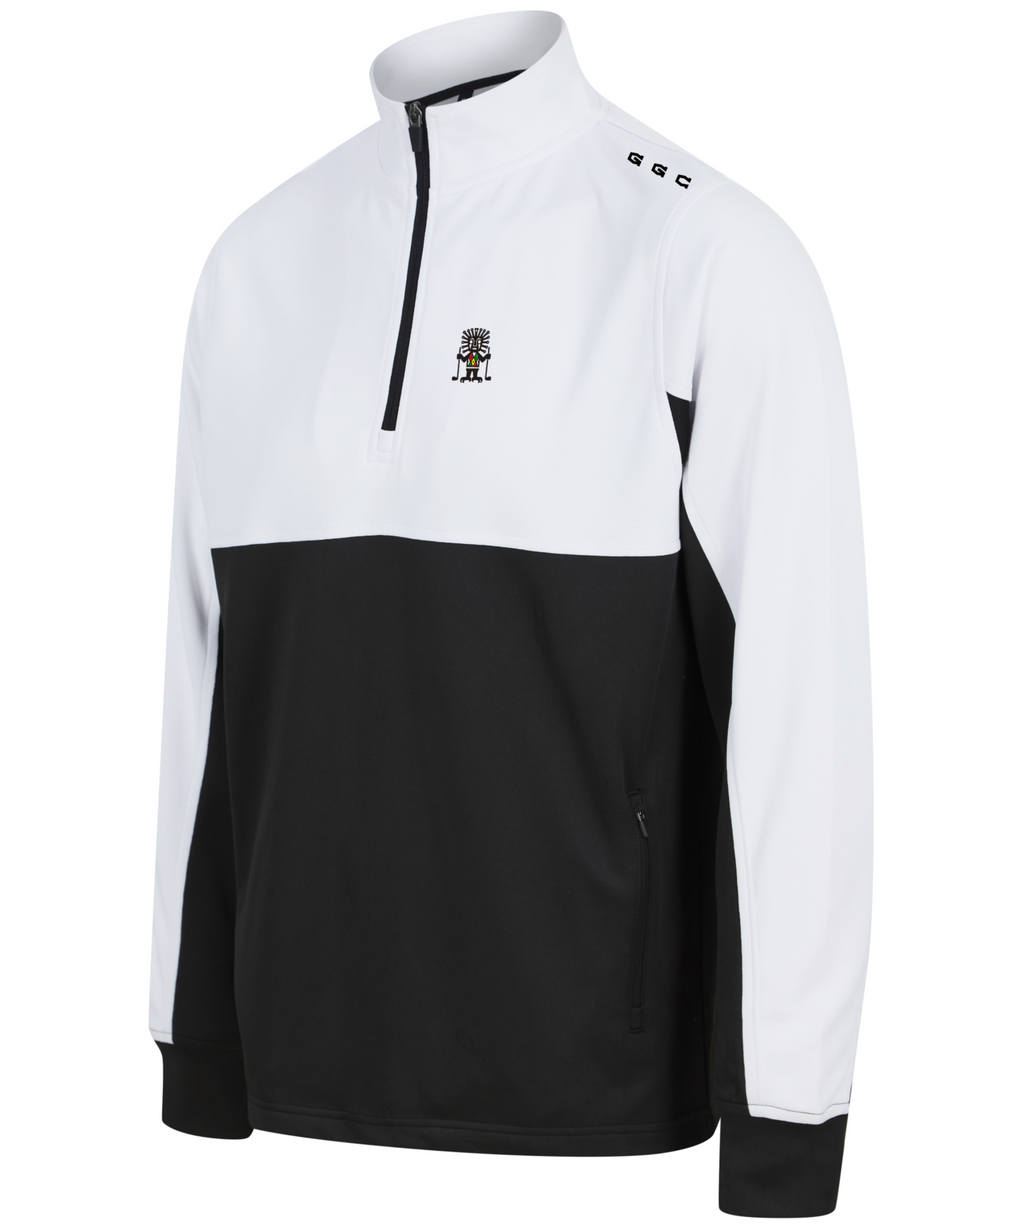 Golf god clothing back and white quarter zip mid layer 